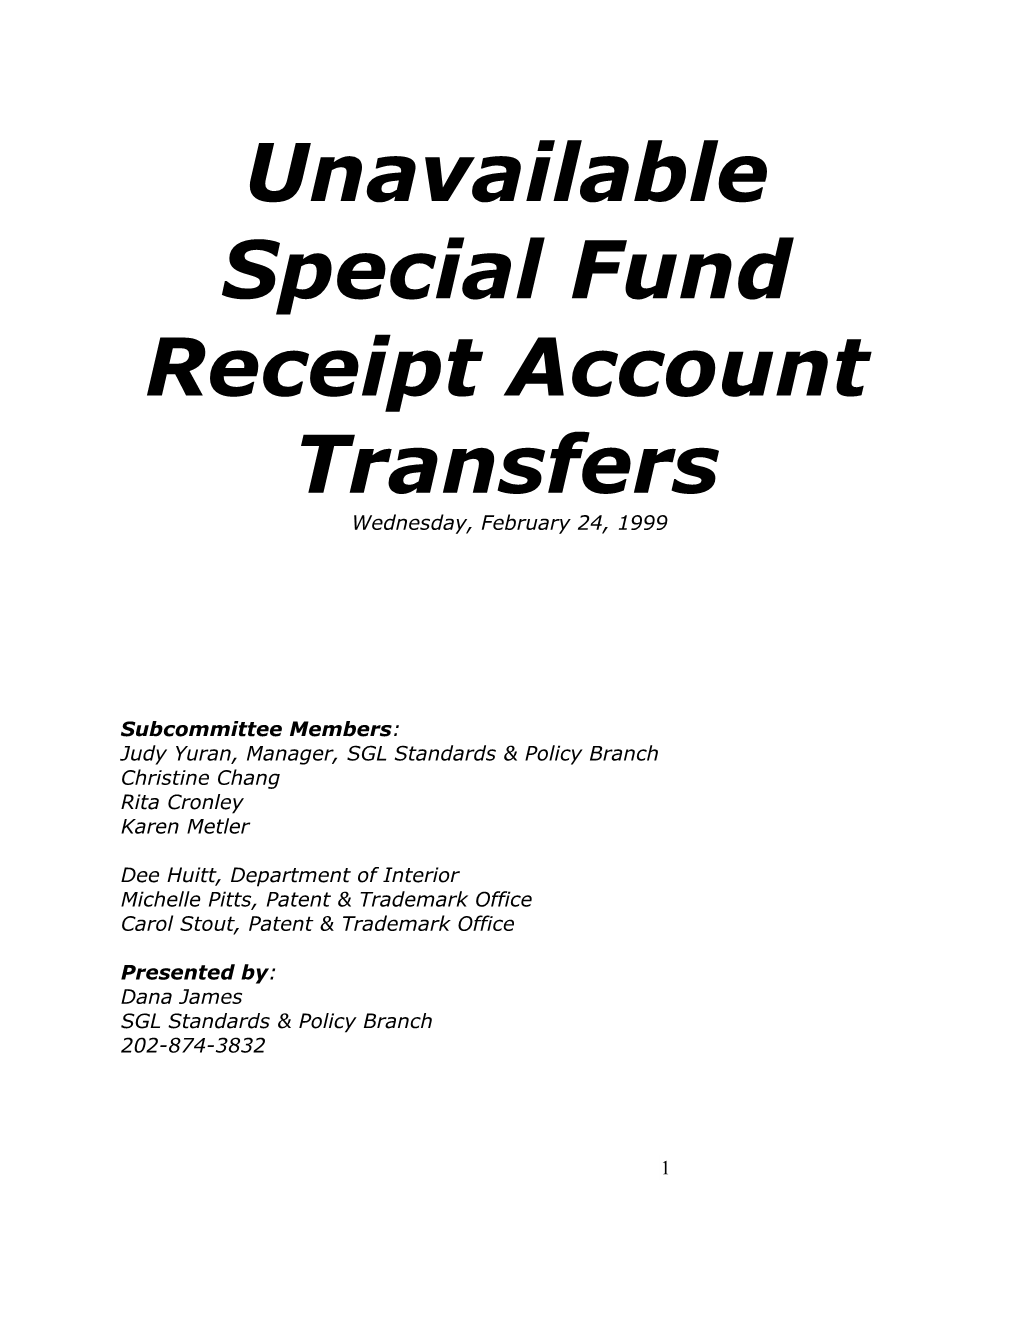 Unavailable Special Fund Receipt Account Transfers